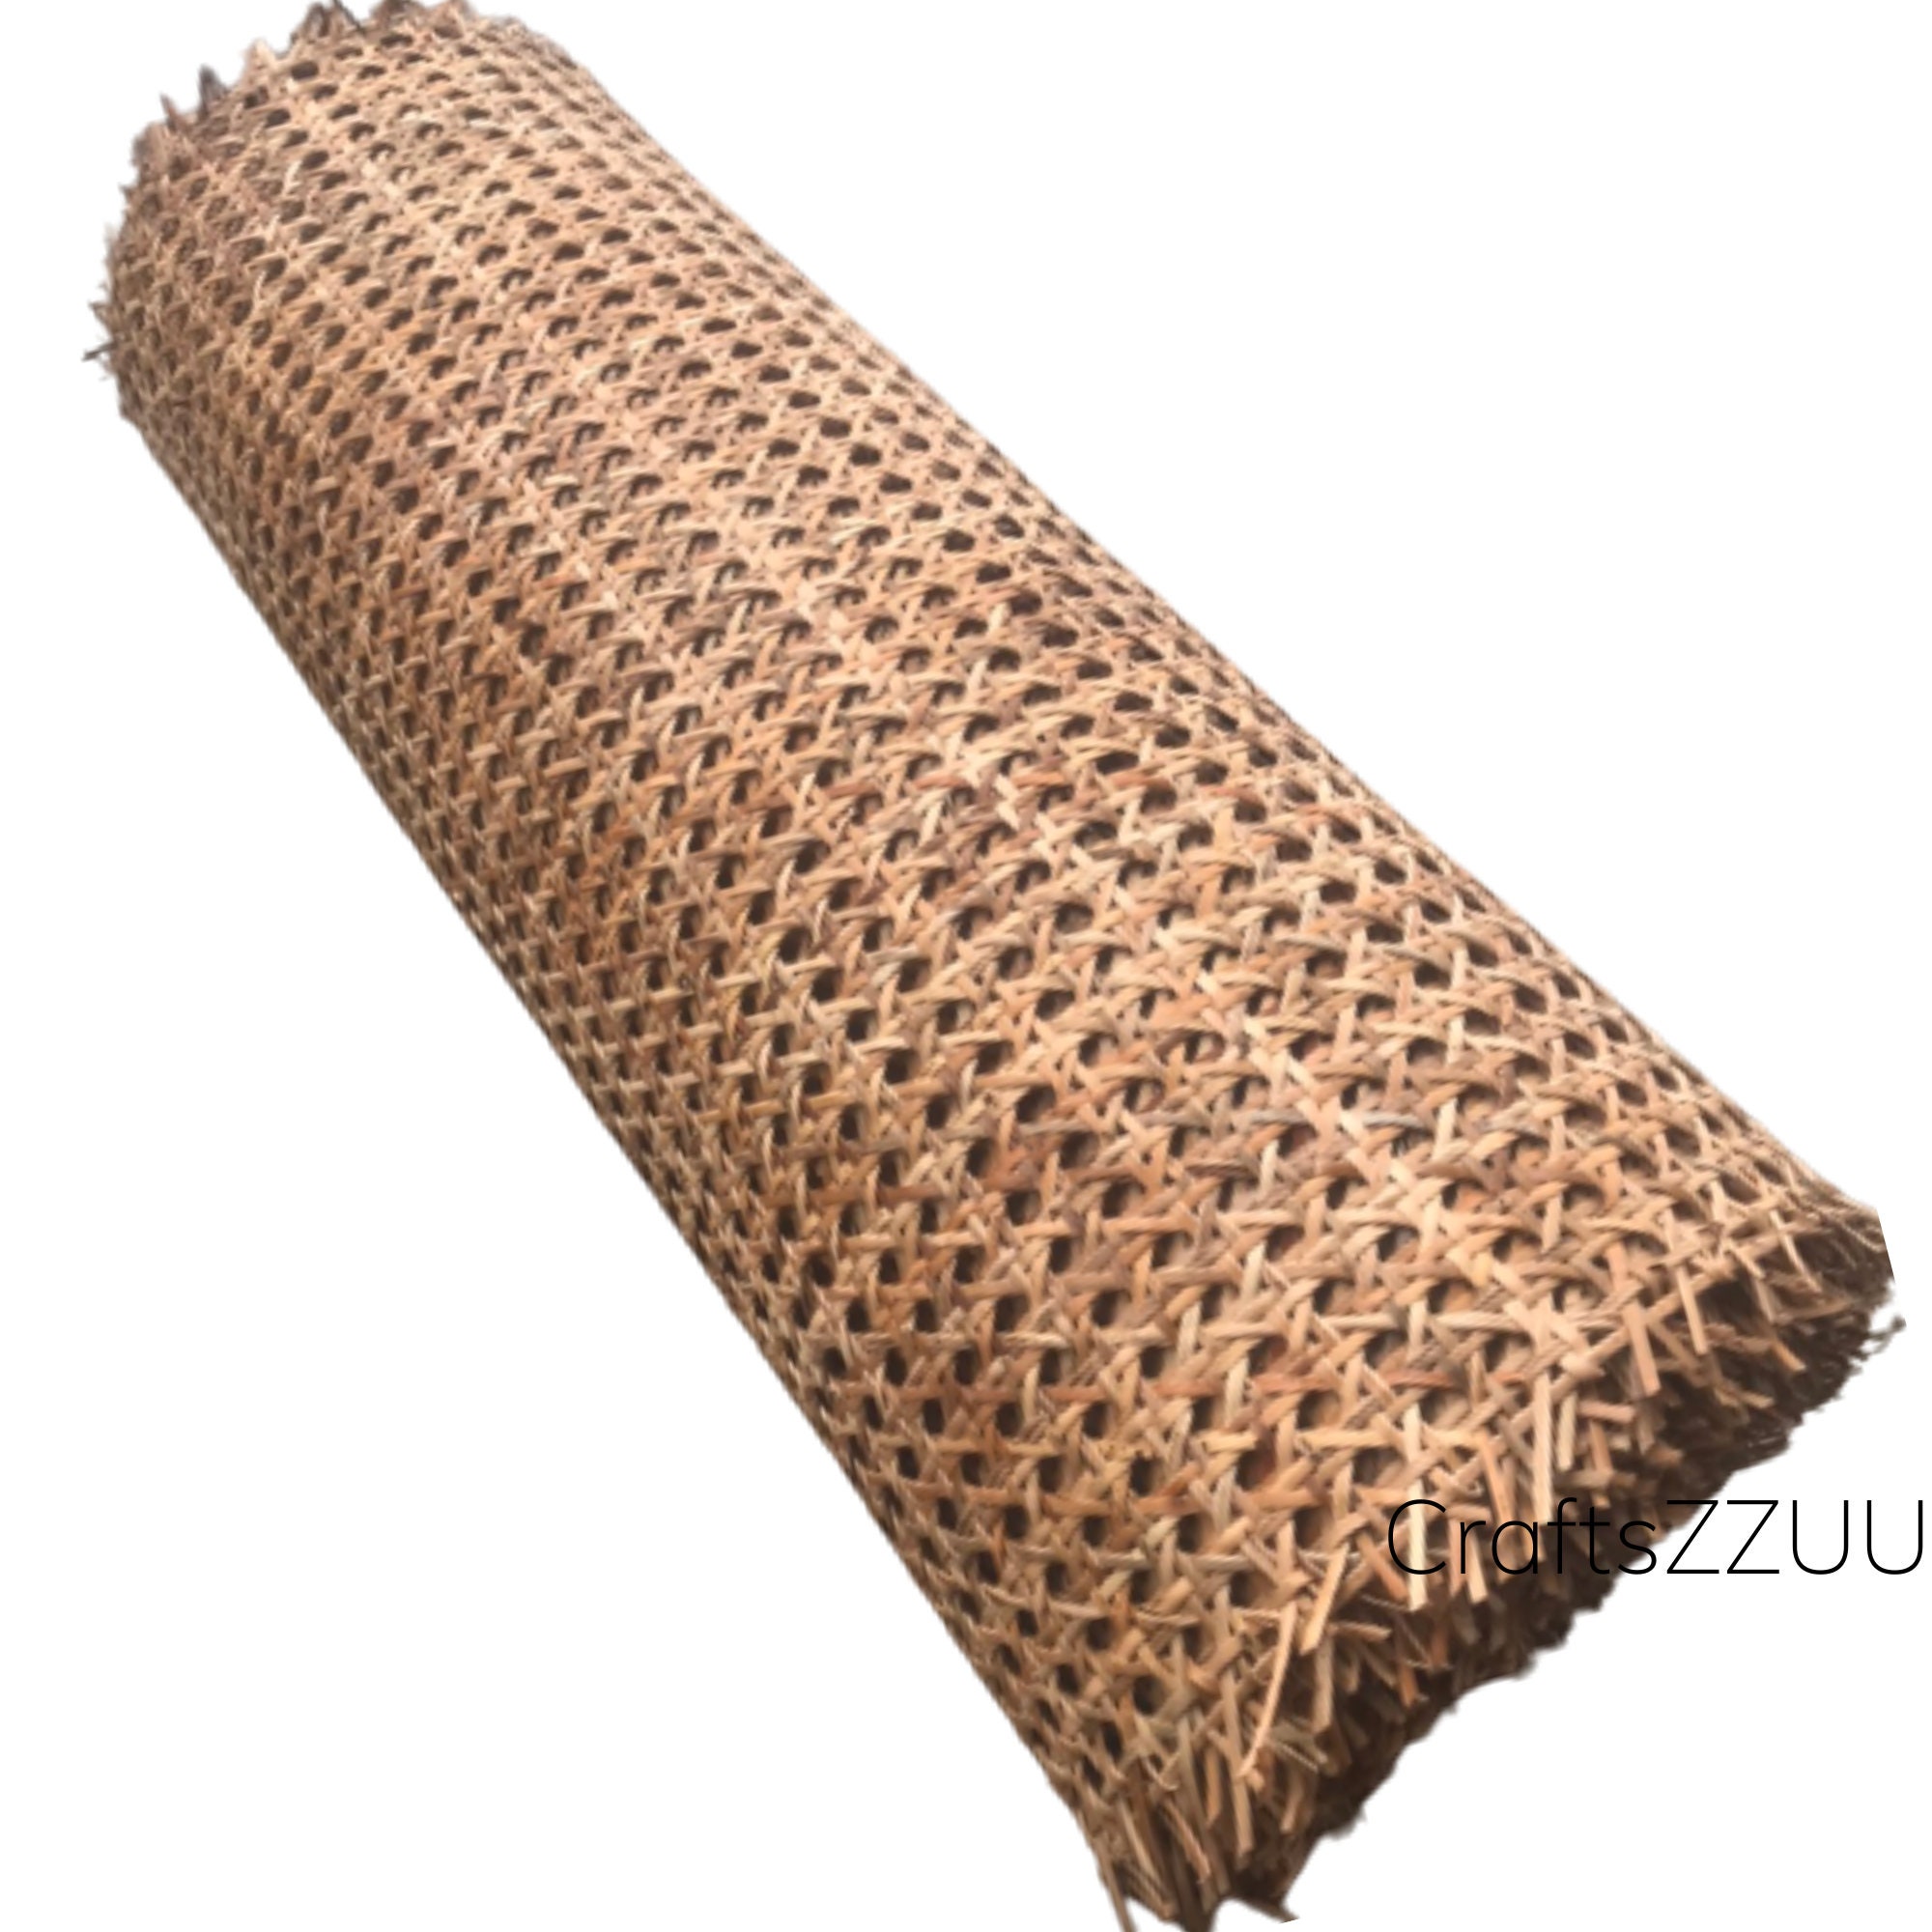 24 Wide, Natural Radio Weave, Cane Webbing Roll, Buy More Save